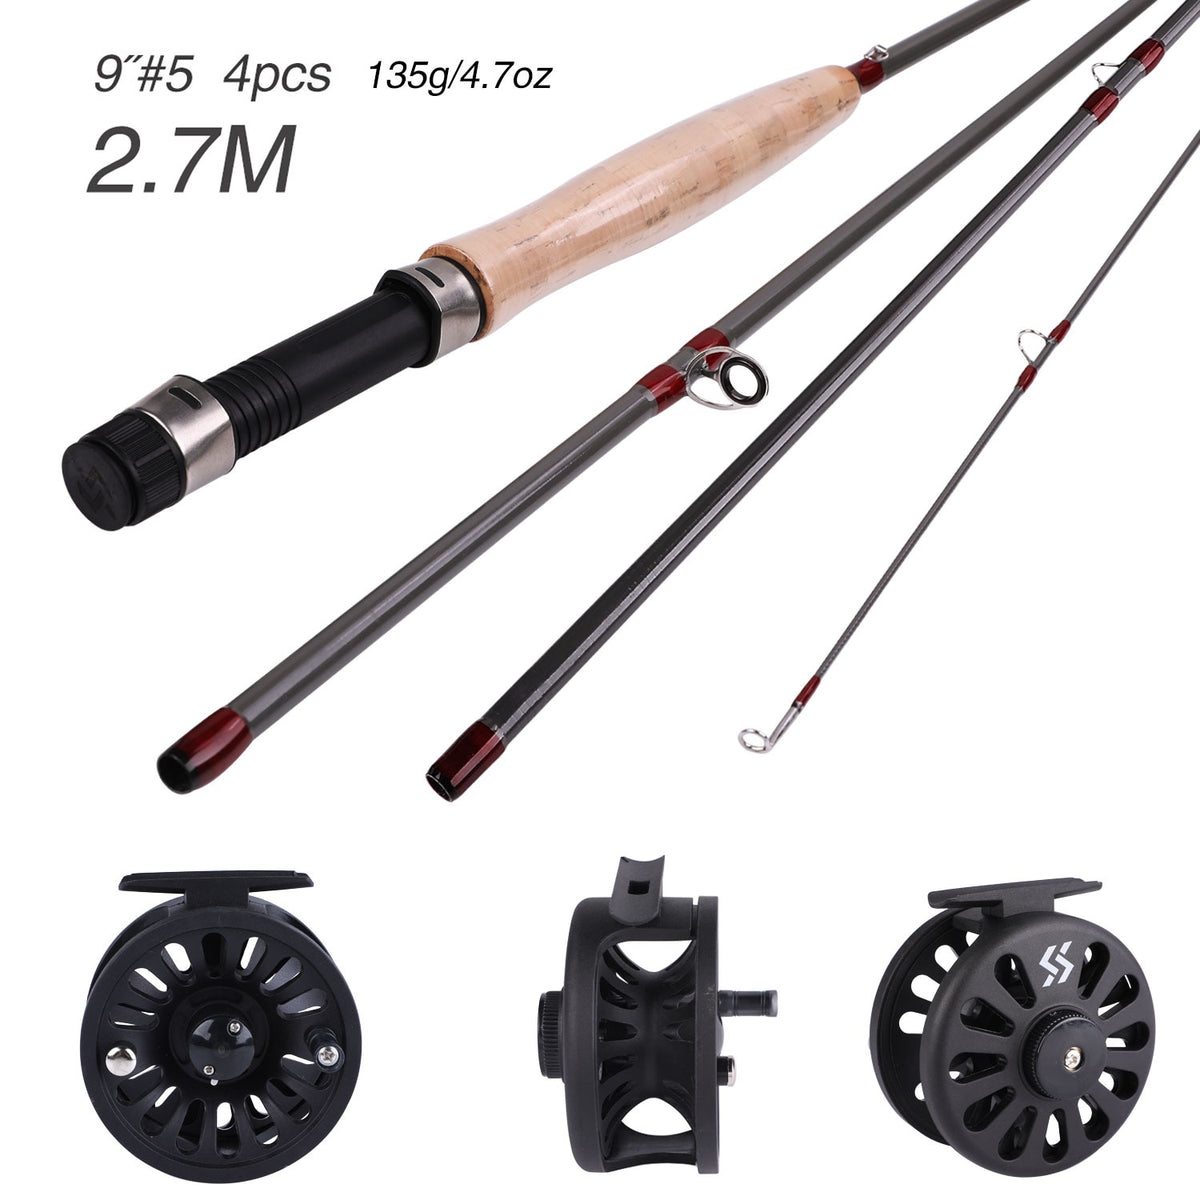 Sougayilang 2.7M 5/6 Fly Fishing Rod Combo Portable 4 Section Metal Handle  Carbon Fiber Fishing Rod Top Quality Fly Reel Set